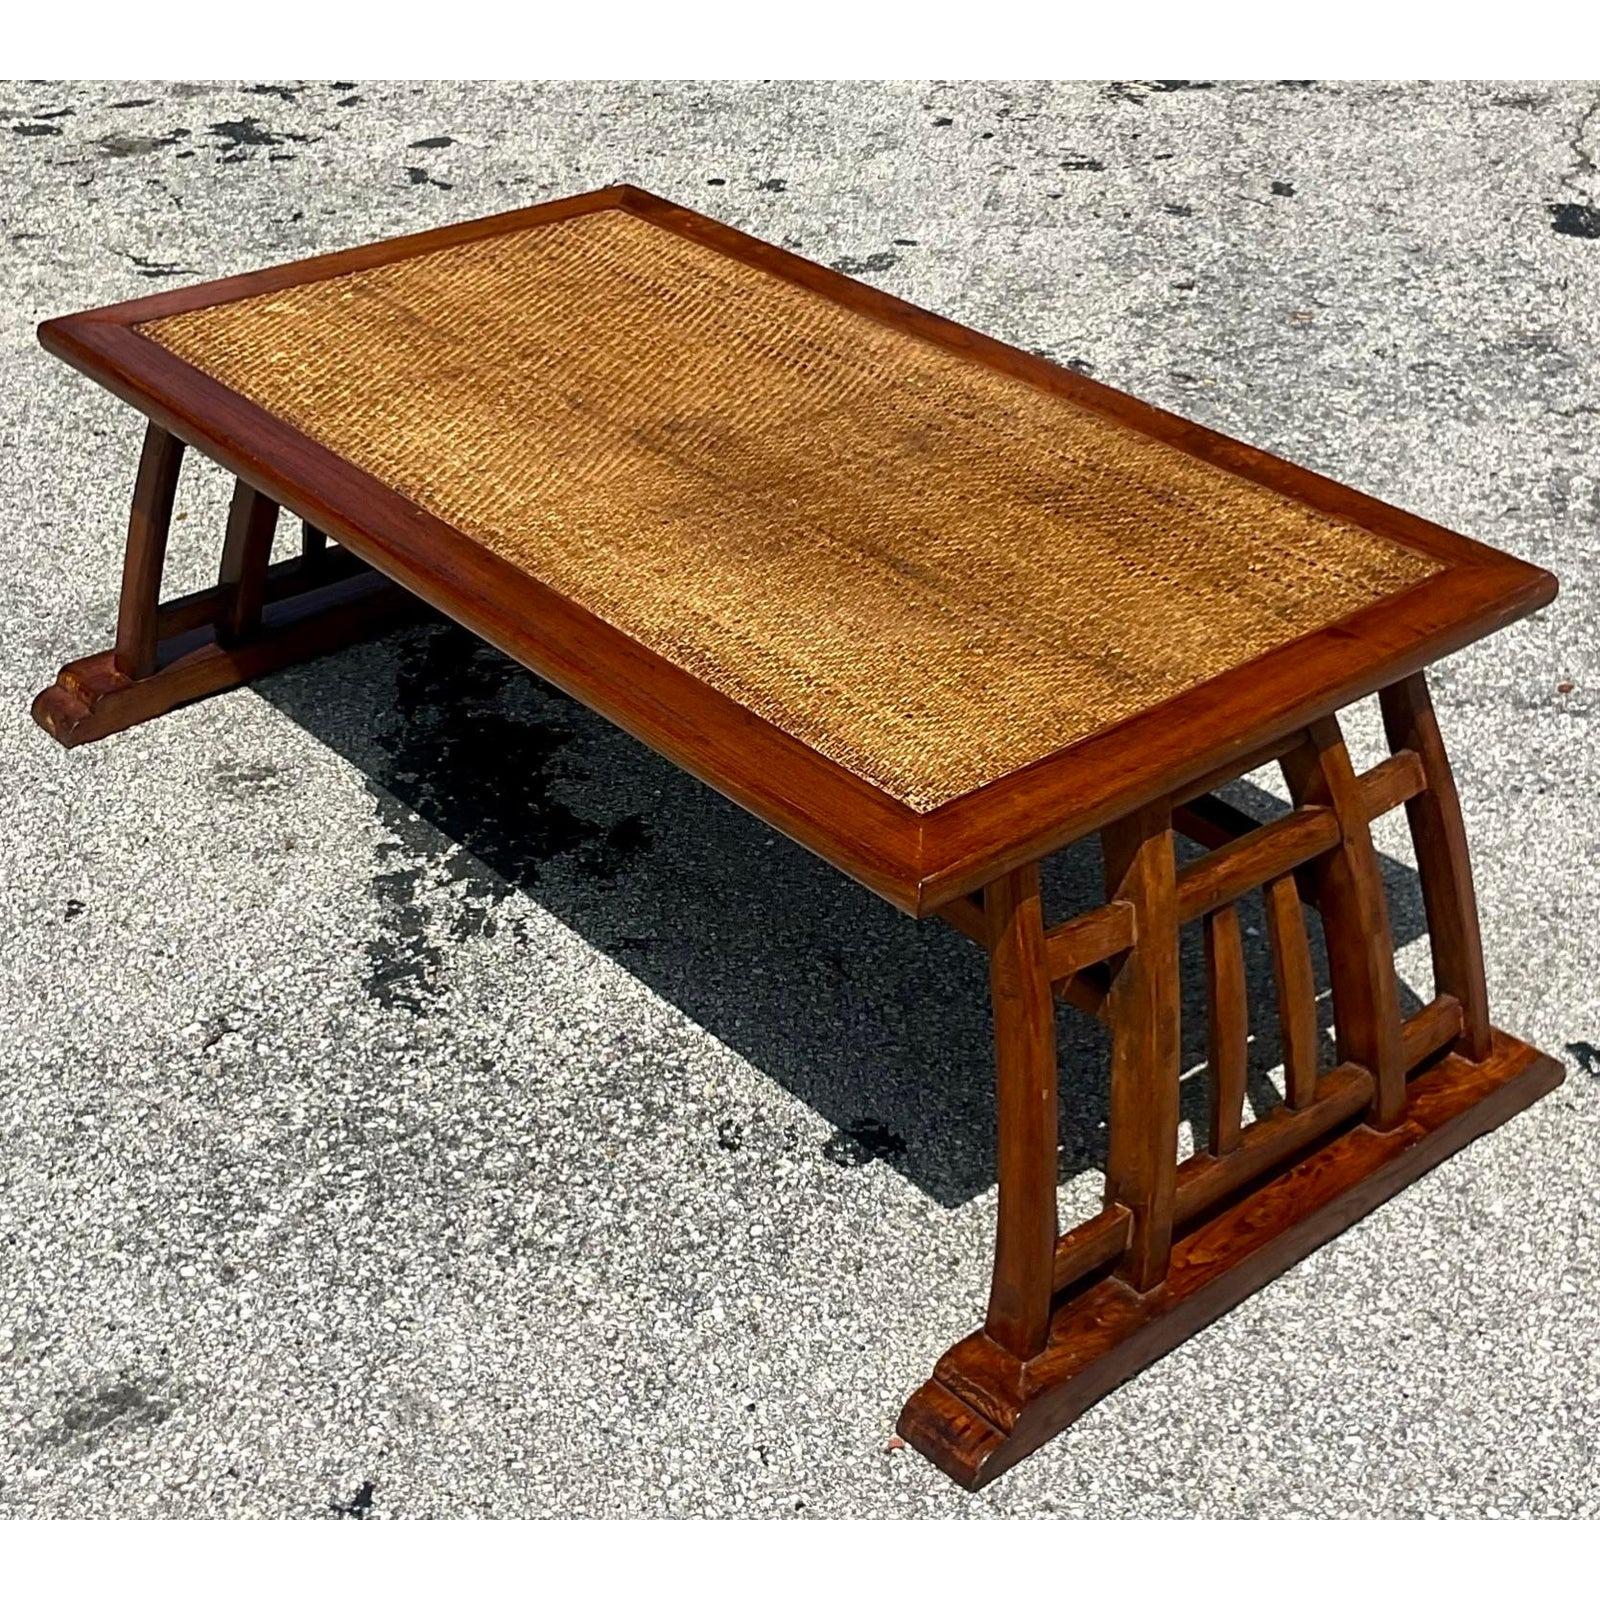 A fabulous vintage Coastal coffee table. A chic Teak wood frame with an inset woven rattan panel. Acquired from a Palm Beach estate.

The table is in great vintage co Siri on. Minor scuffs and blemishes appropriate to the age and use. Surface wear.